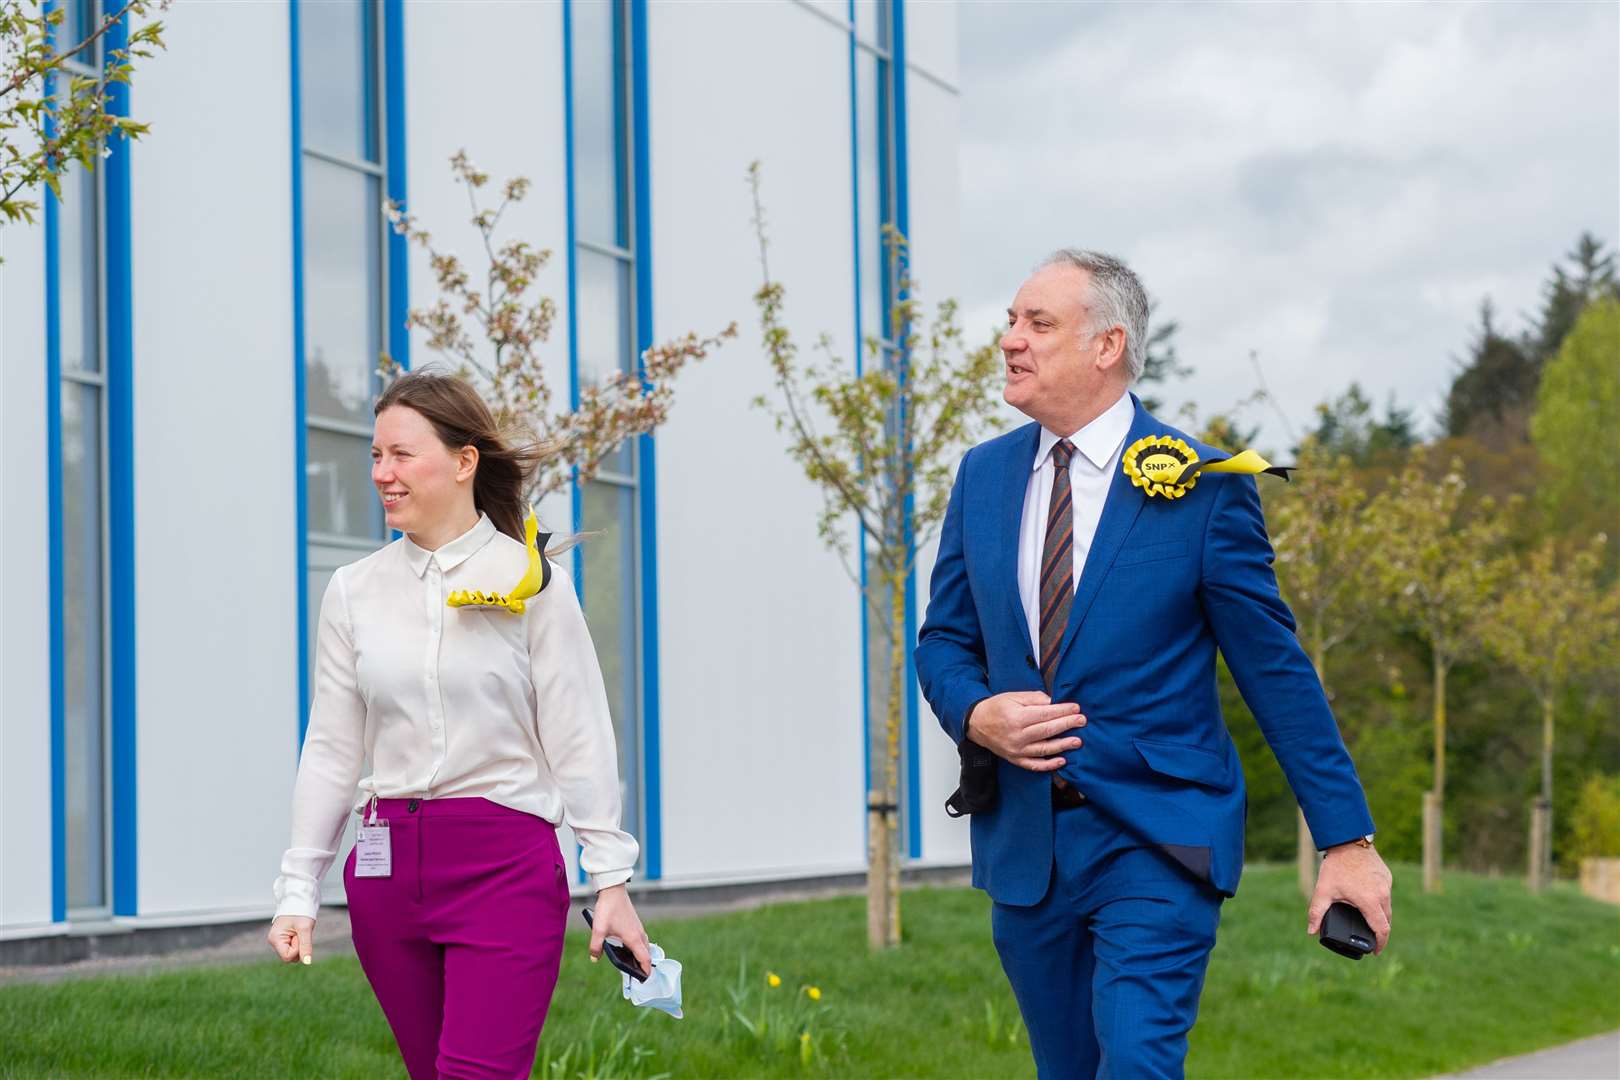 Richard Lochhead, Moray's SNP MSP, arrives at the Regional Count on Saturday morning with his agent Laura Mitchell following a period of precautionary self-isolation...Moray's 2021 Scottish Election...Picture: Daniel Forsyth.